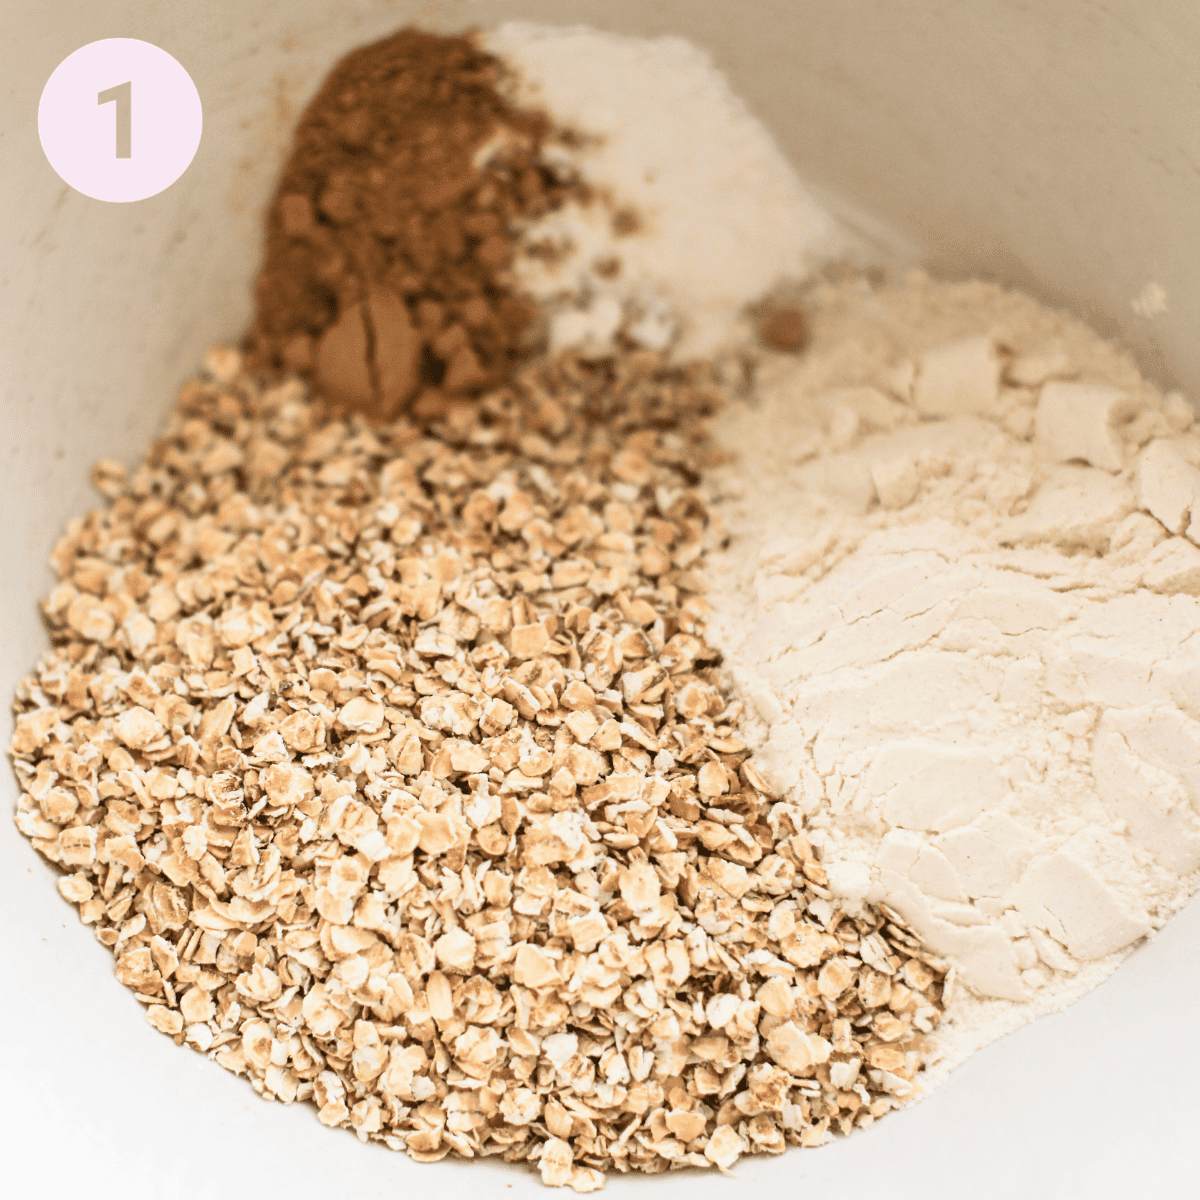 Mixing oats, flour and ginger in a large mixing bowl.